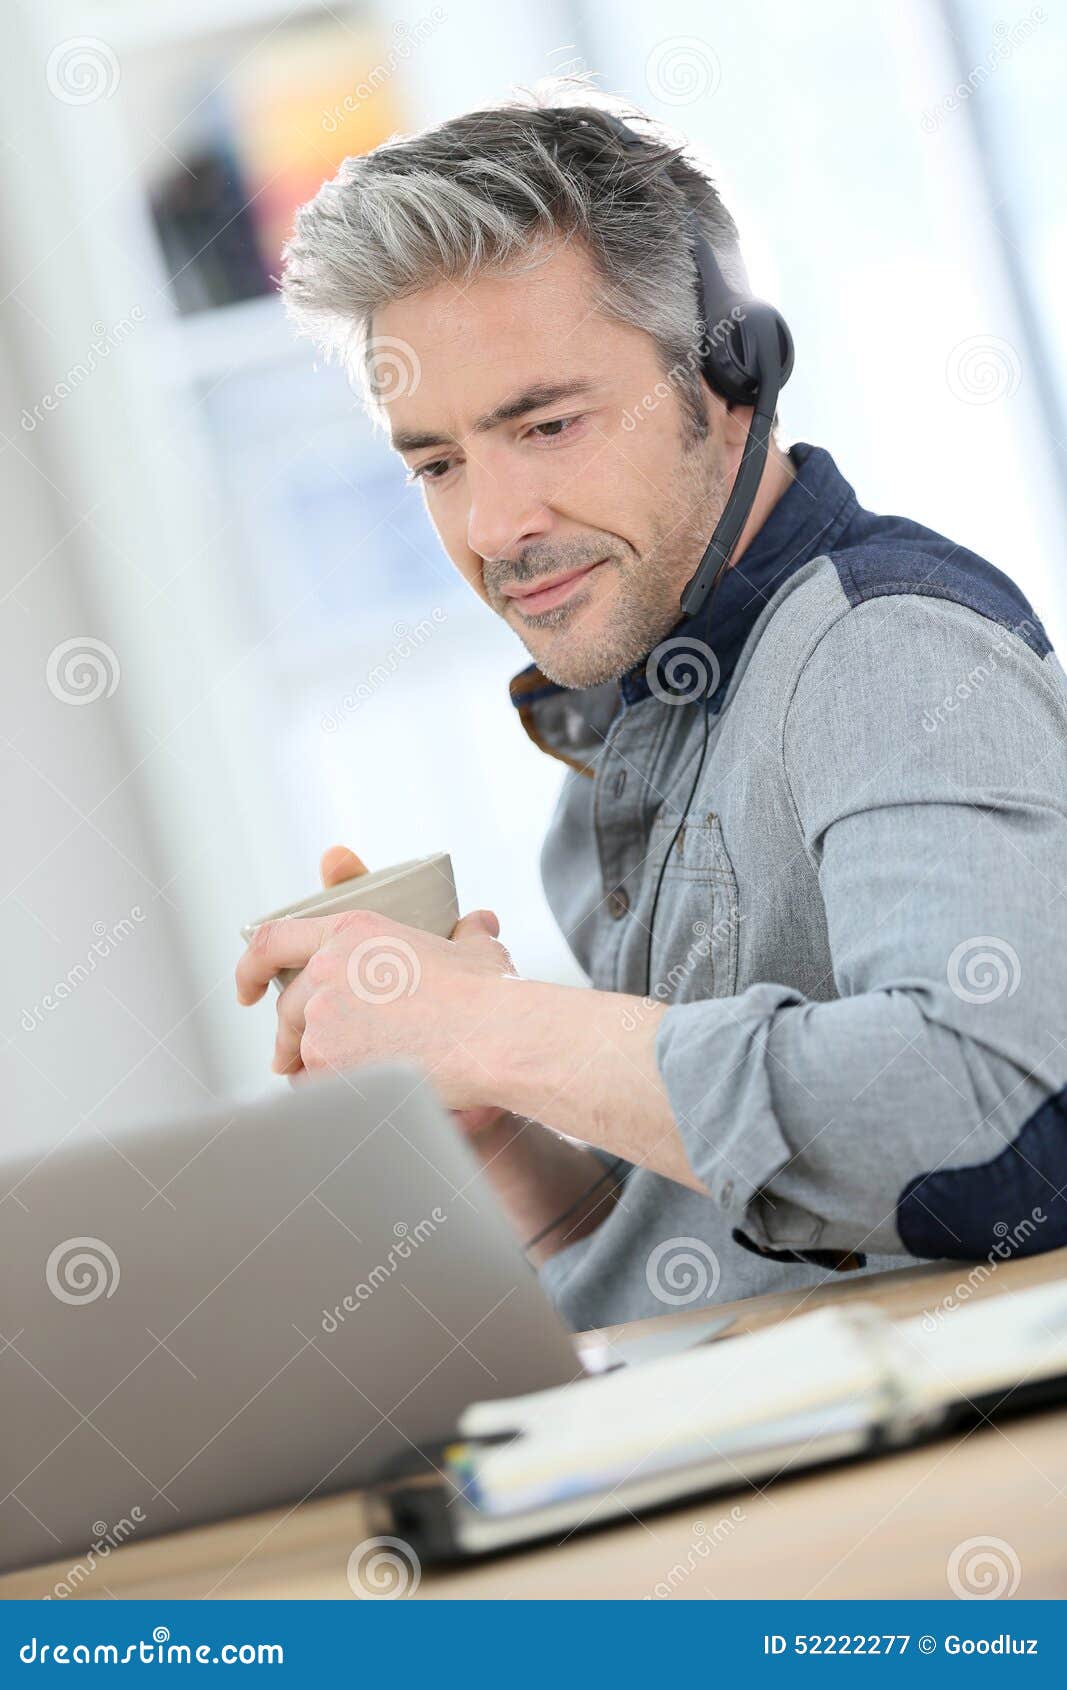 handsome mature man teleworking from home